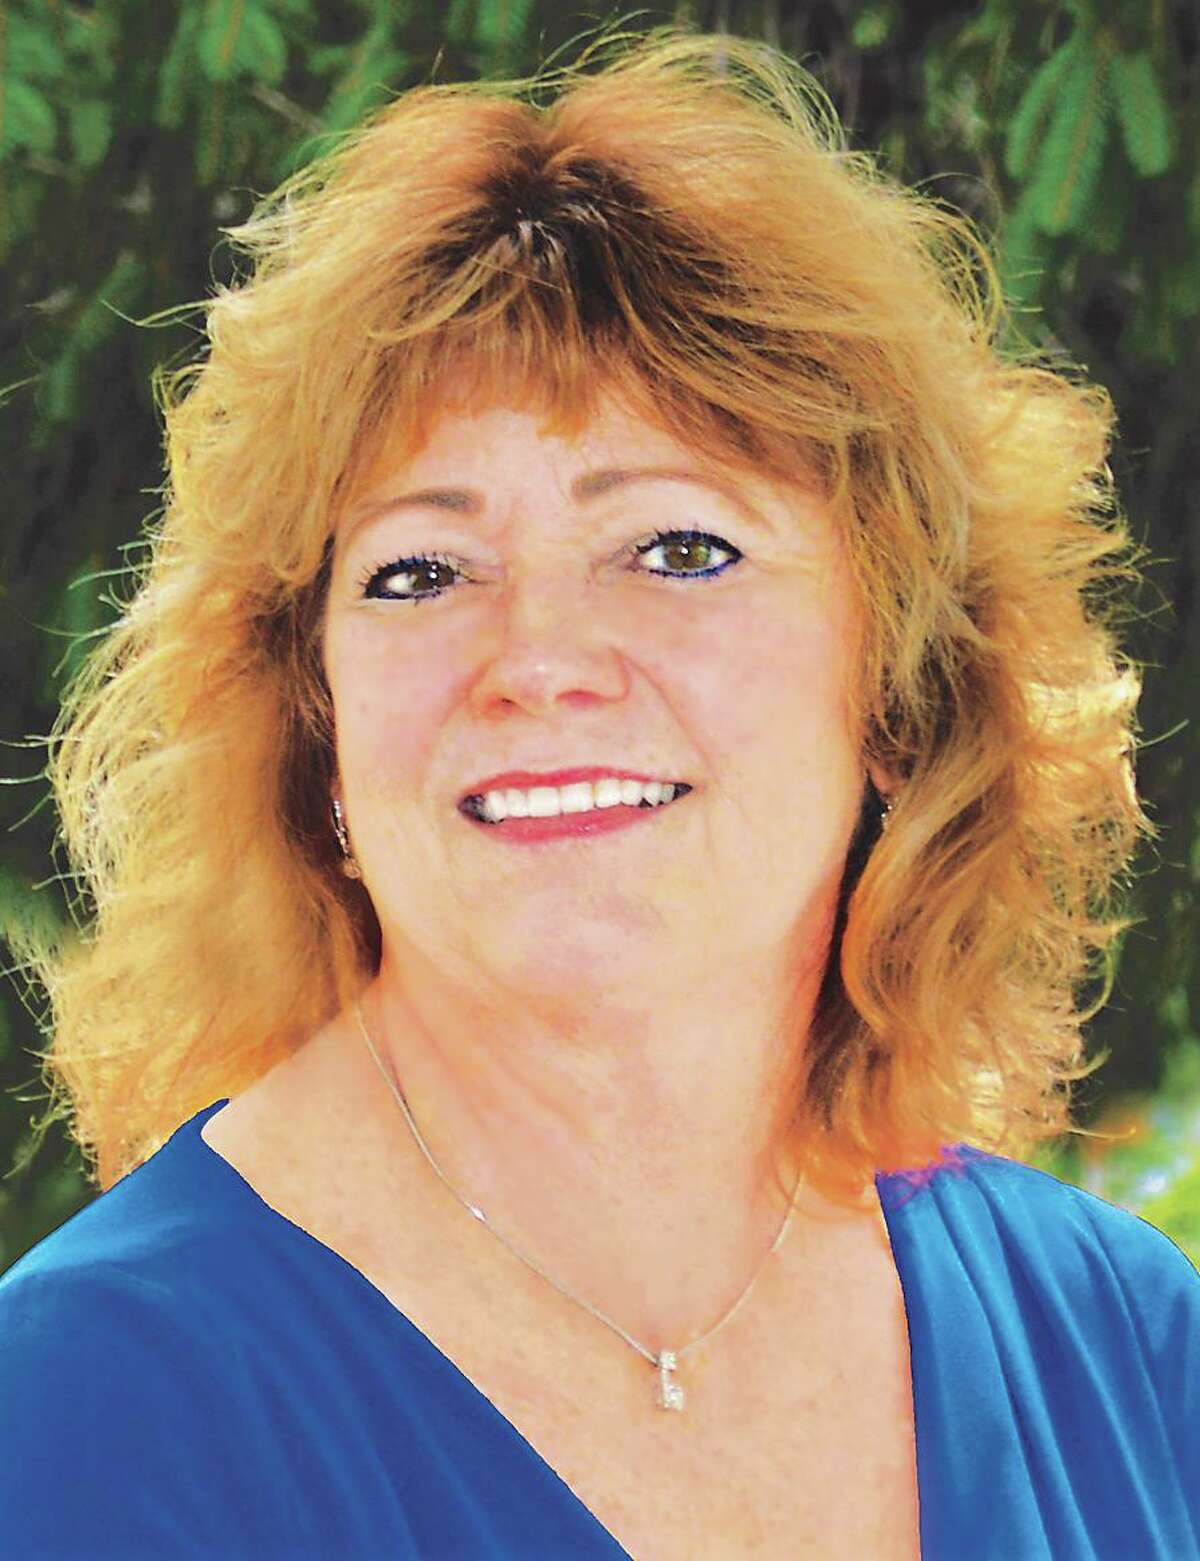 Linda Szynkowicz is the Republican candidate for the state House District 33.